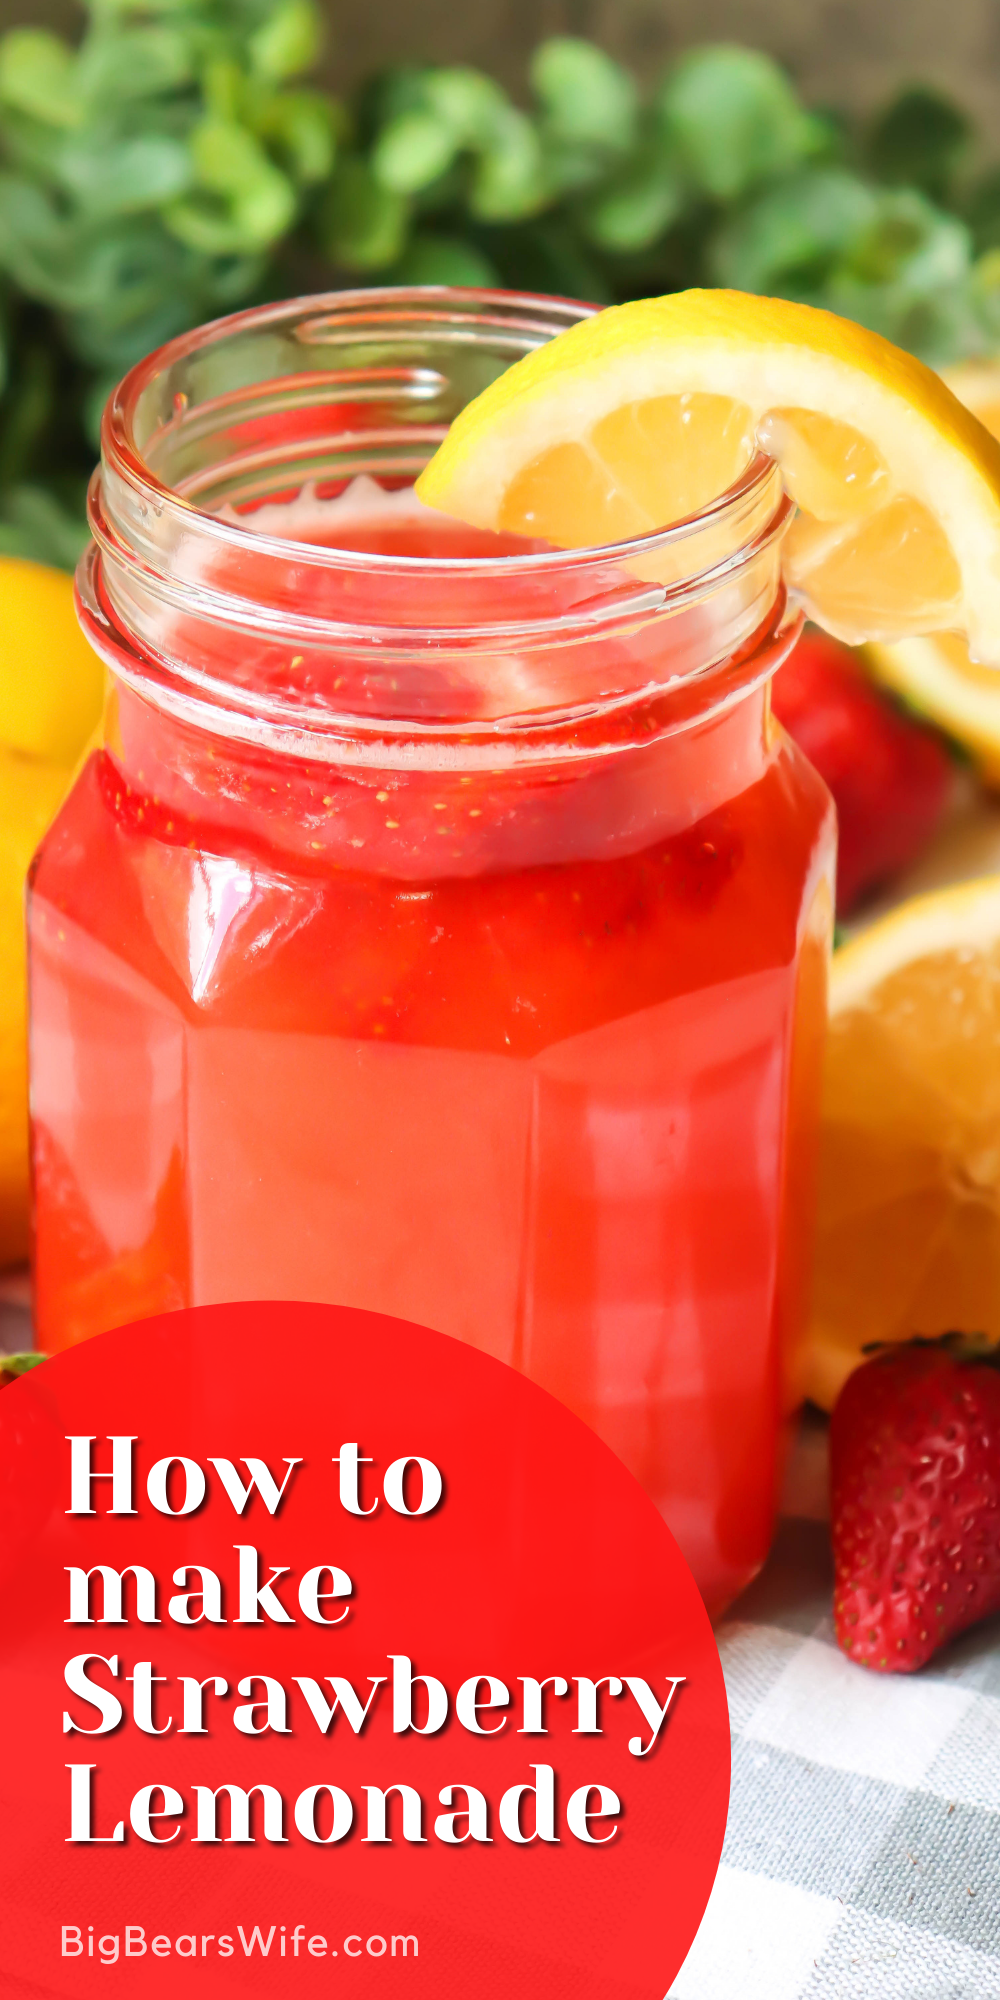 Ready for the perfect summer drink? This Strawberry Lemonade is refreshing and easy to make!  via @bigbearswife